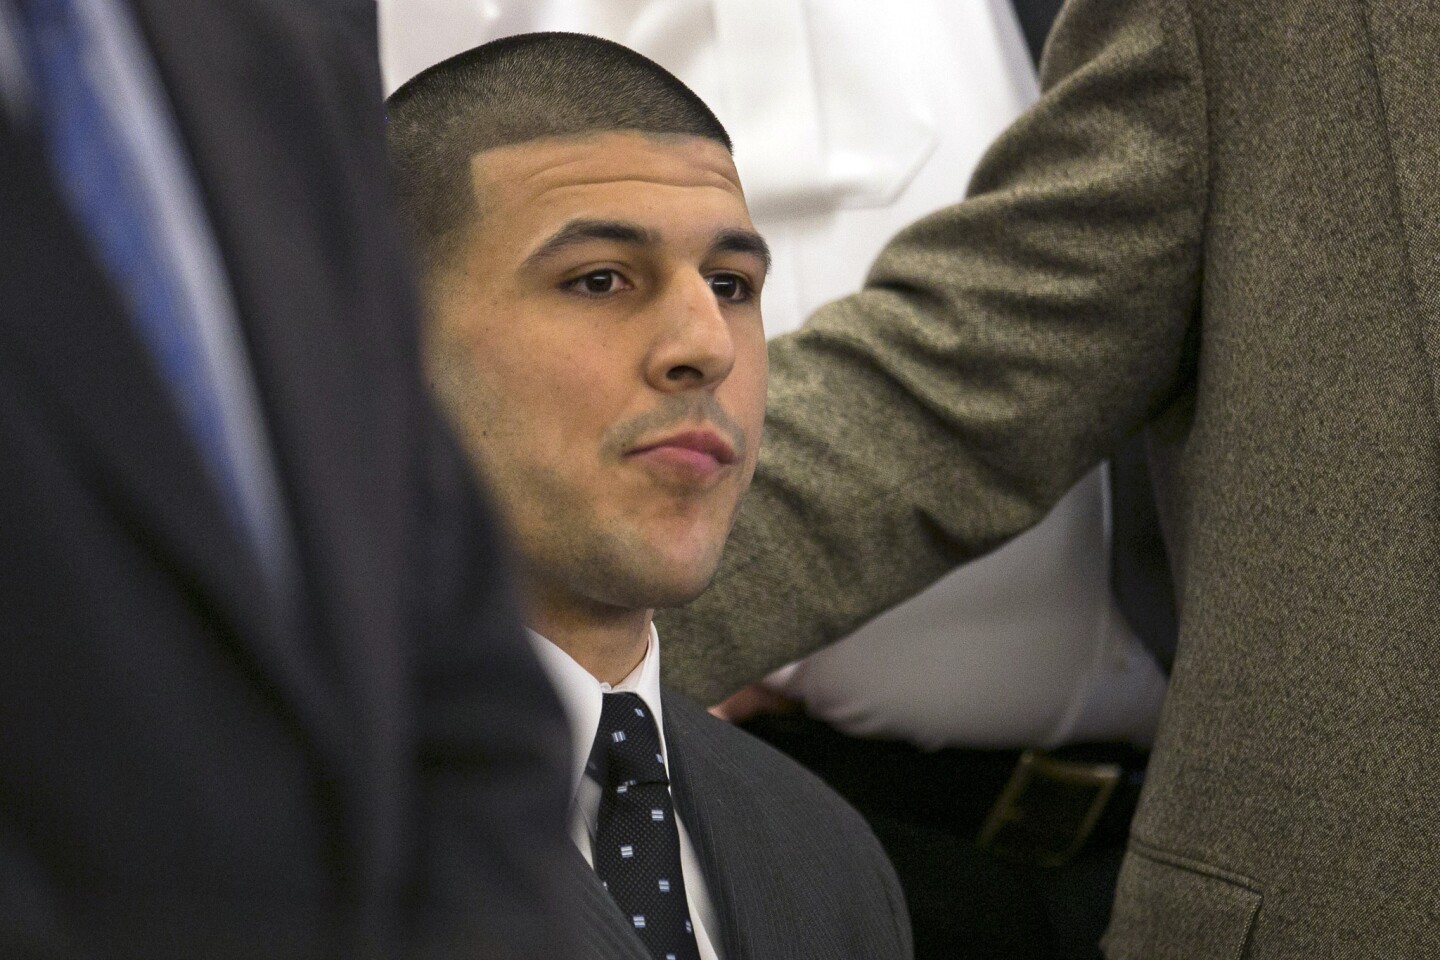 Former New England Patriots tight end Aaron Hernandez listens as the guilty verdict is read during his murder trial at the Bristol County Superior Court in Fall River, Mass., on Wednesday.